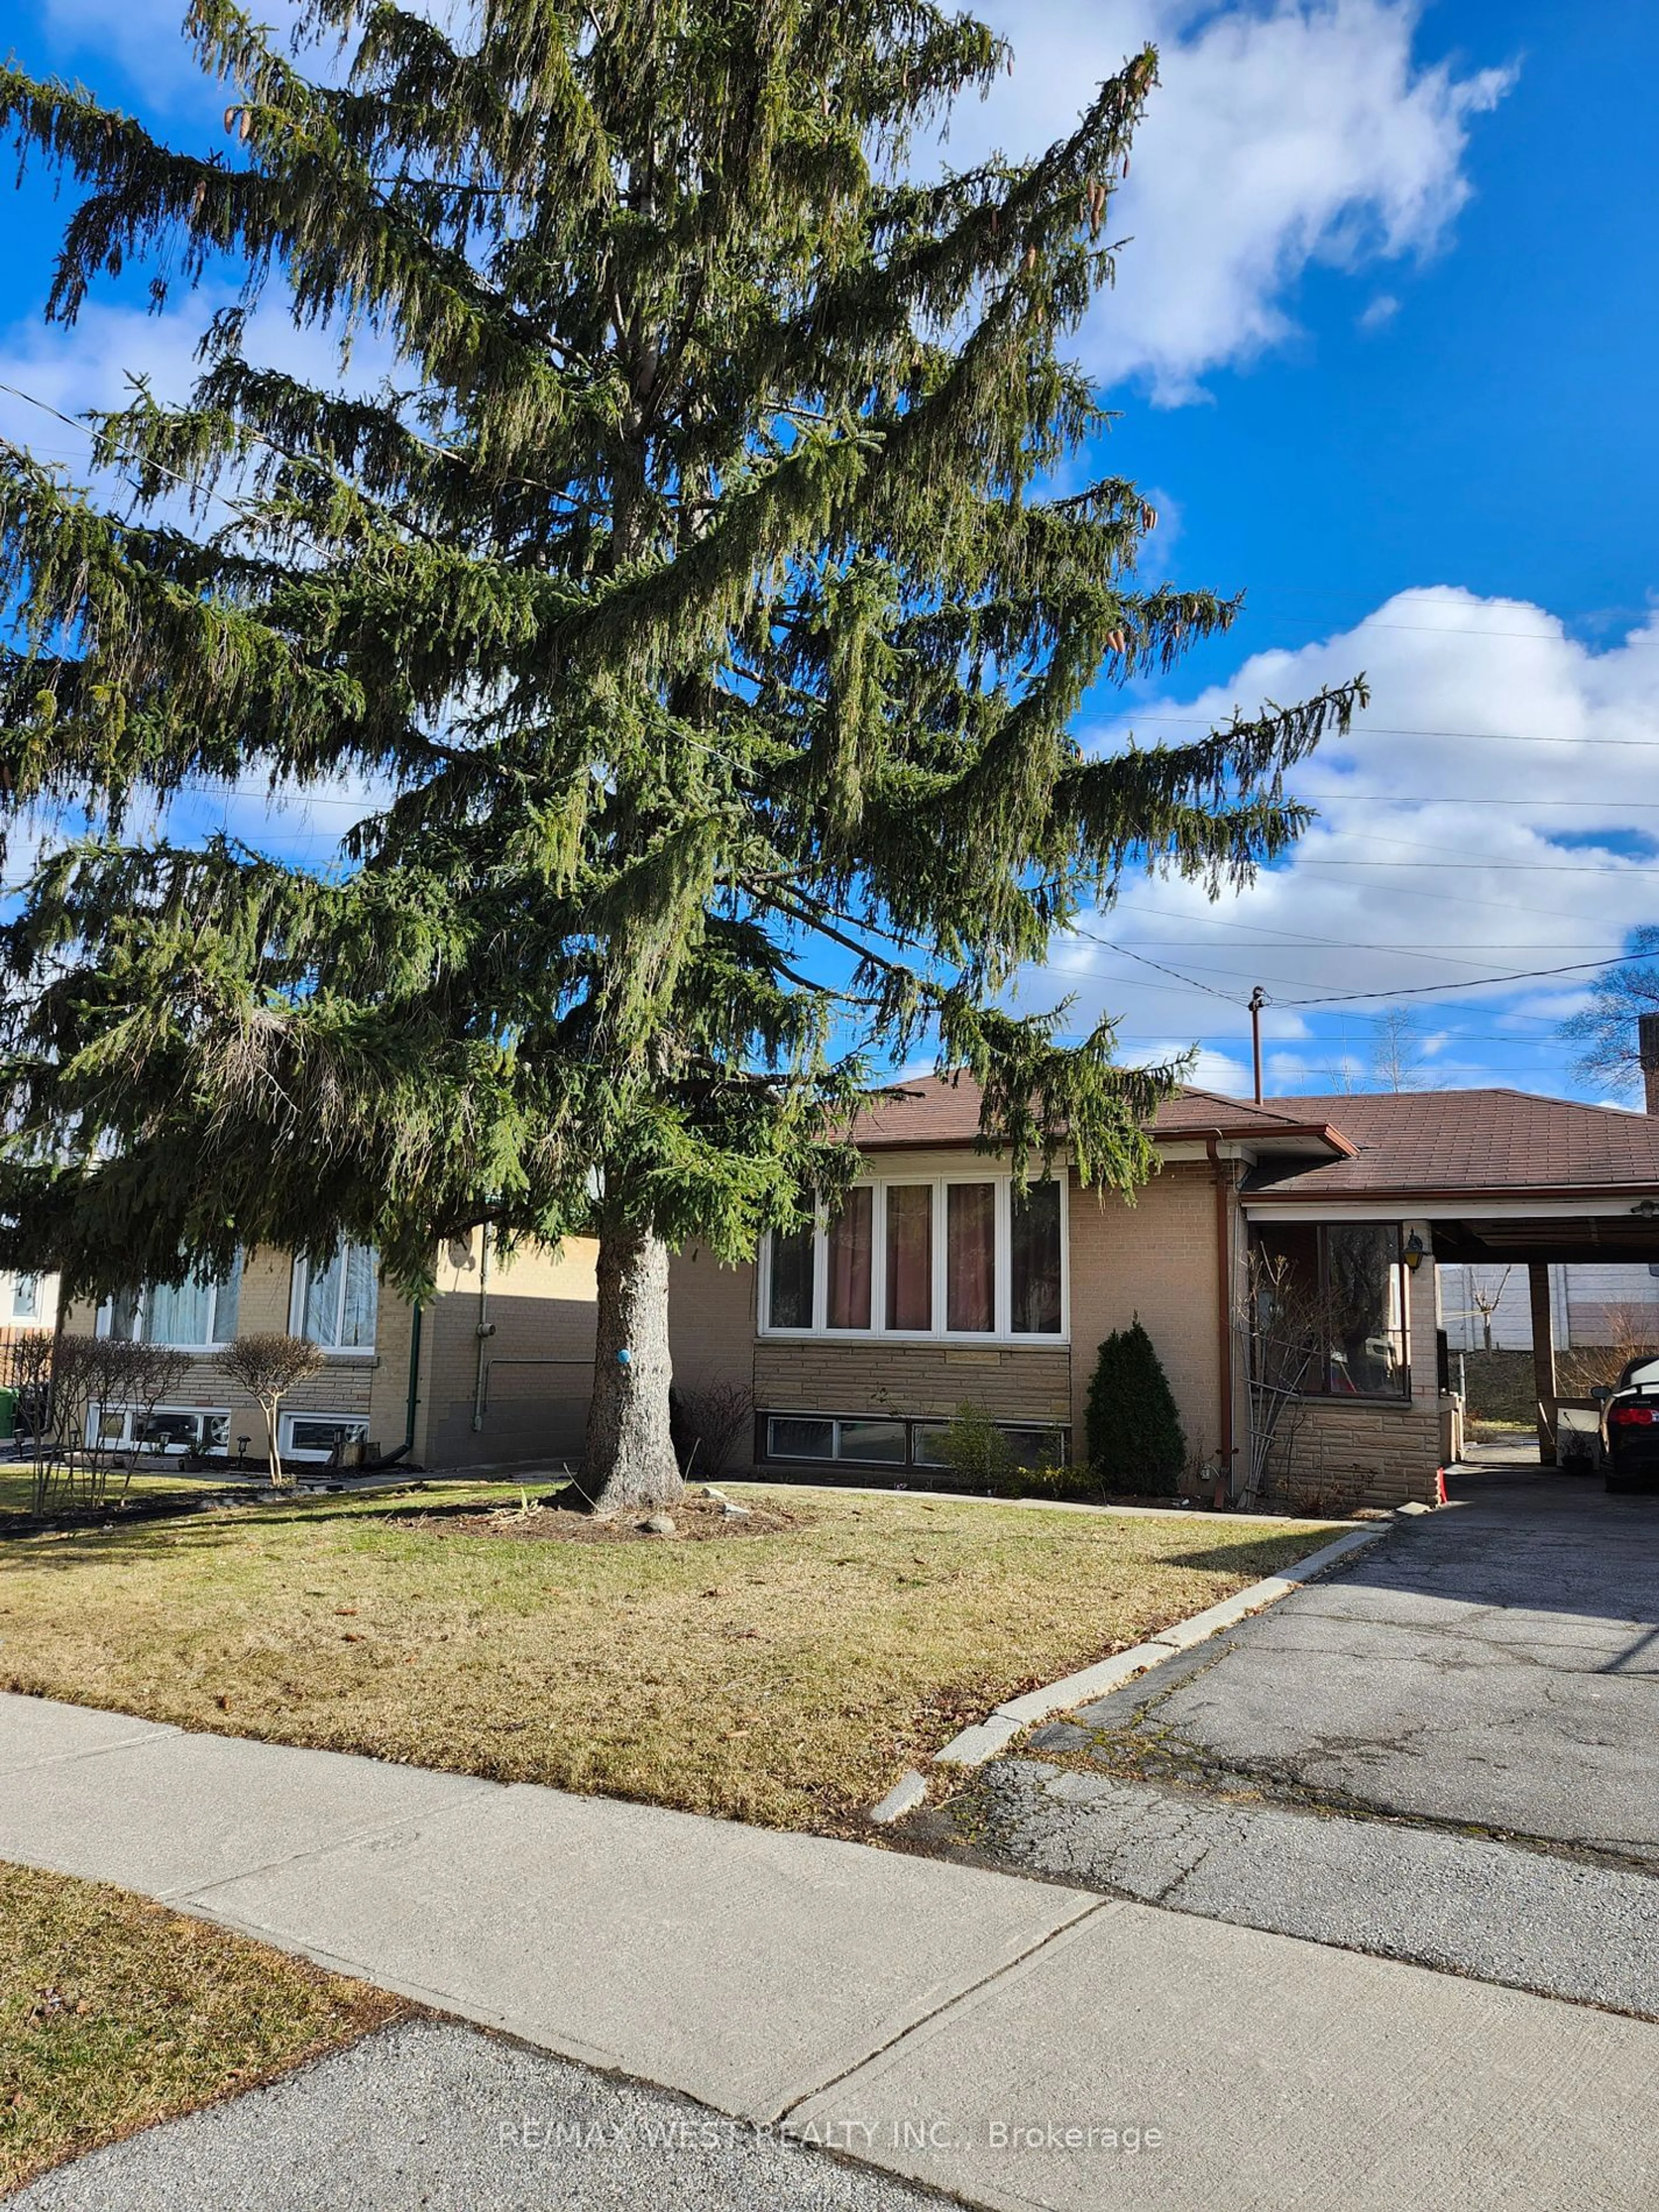 Frontside or backside of a home for 99 Stavely Cres, Toronto Ontario M9W 2C6